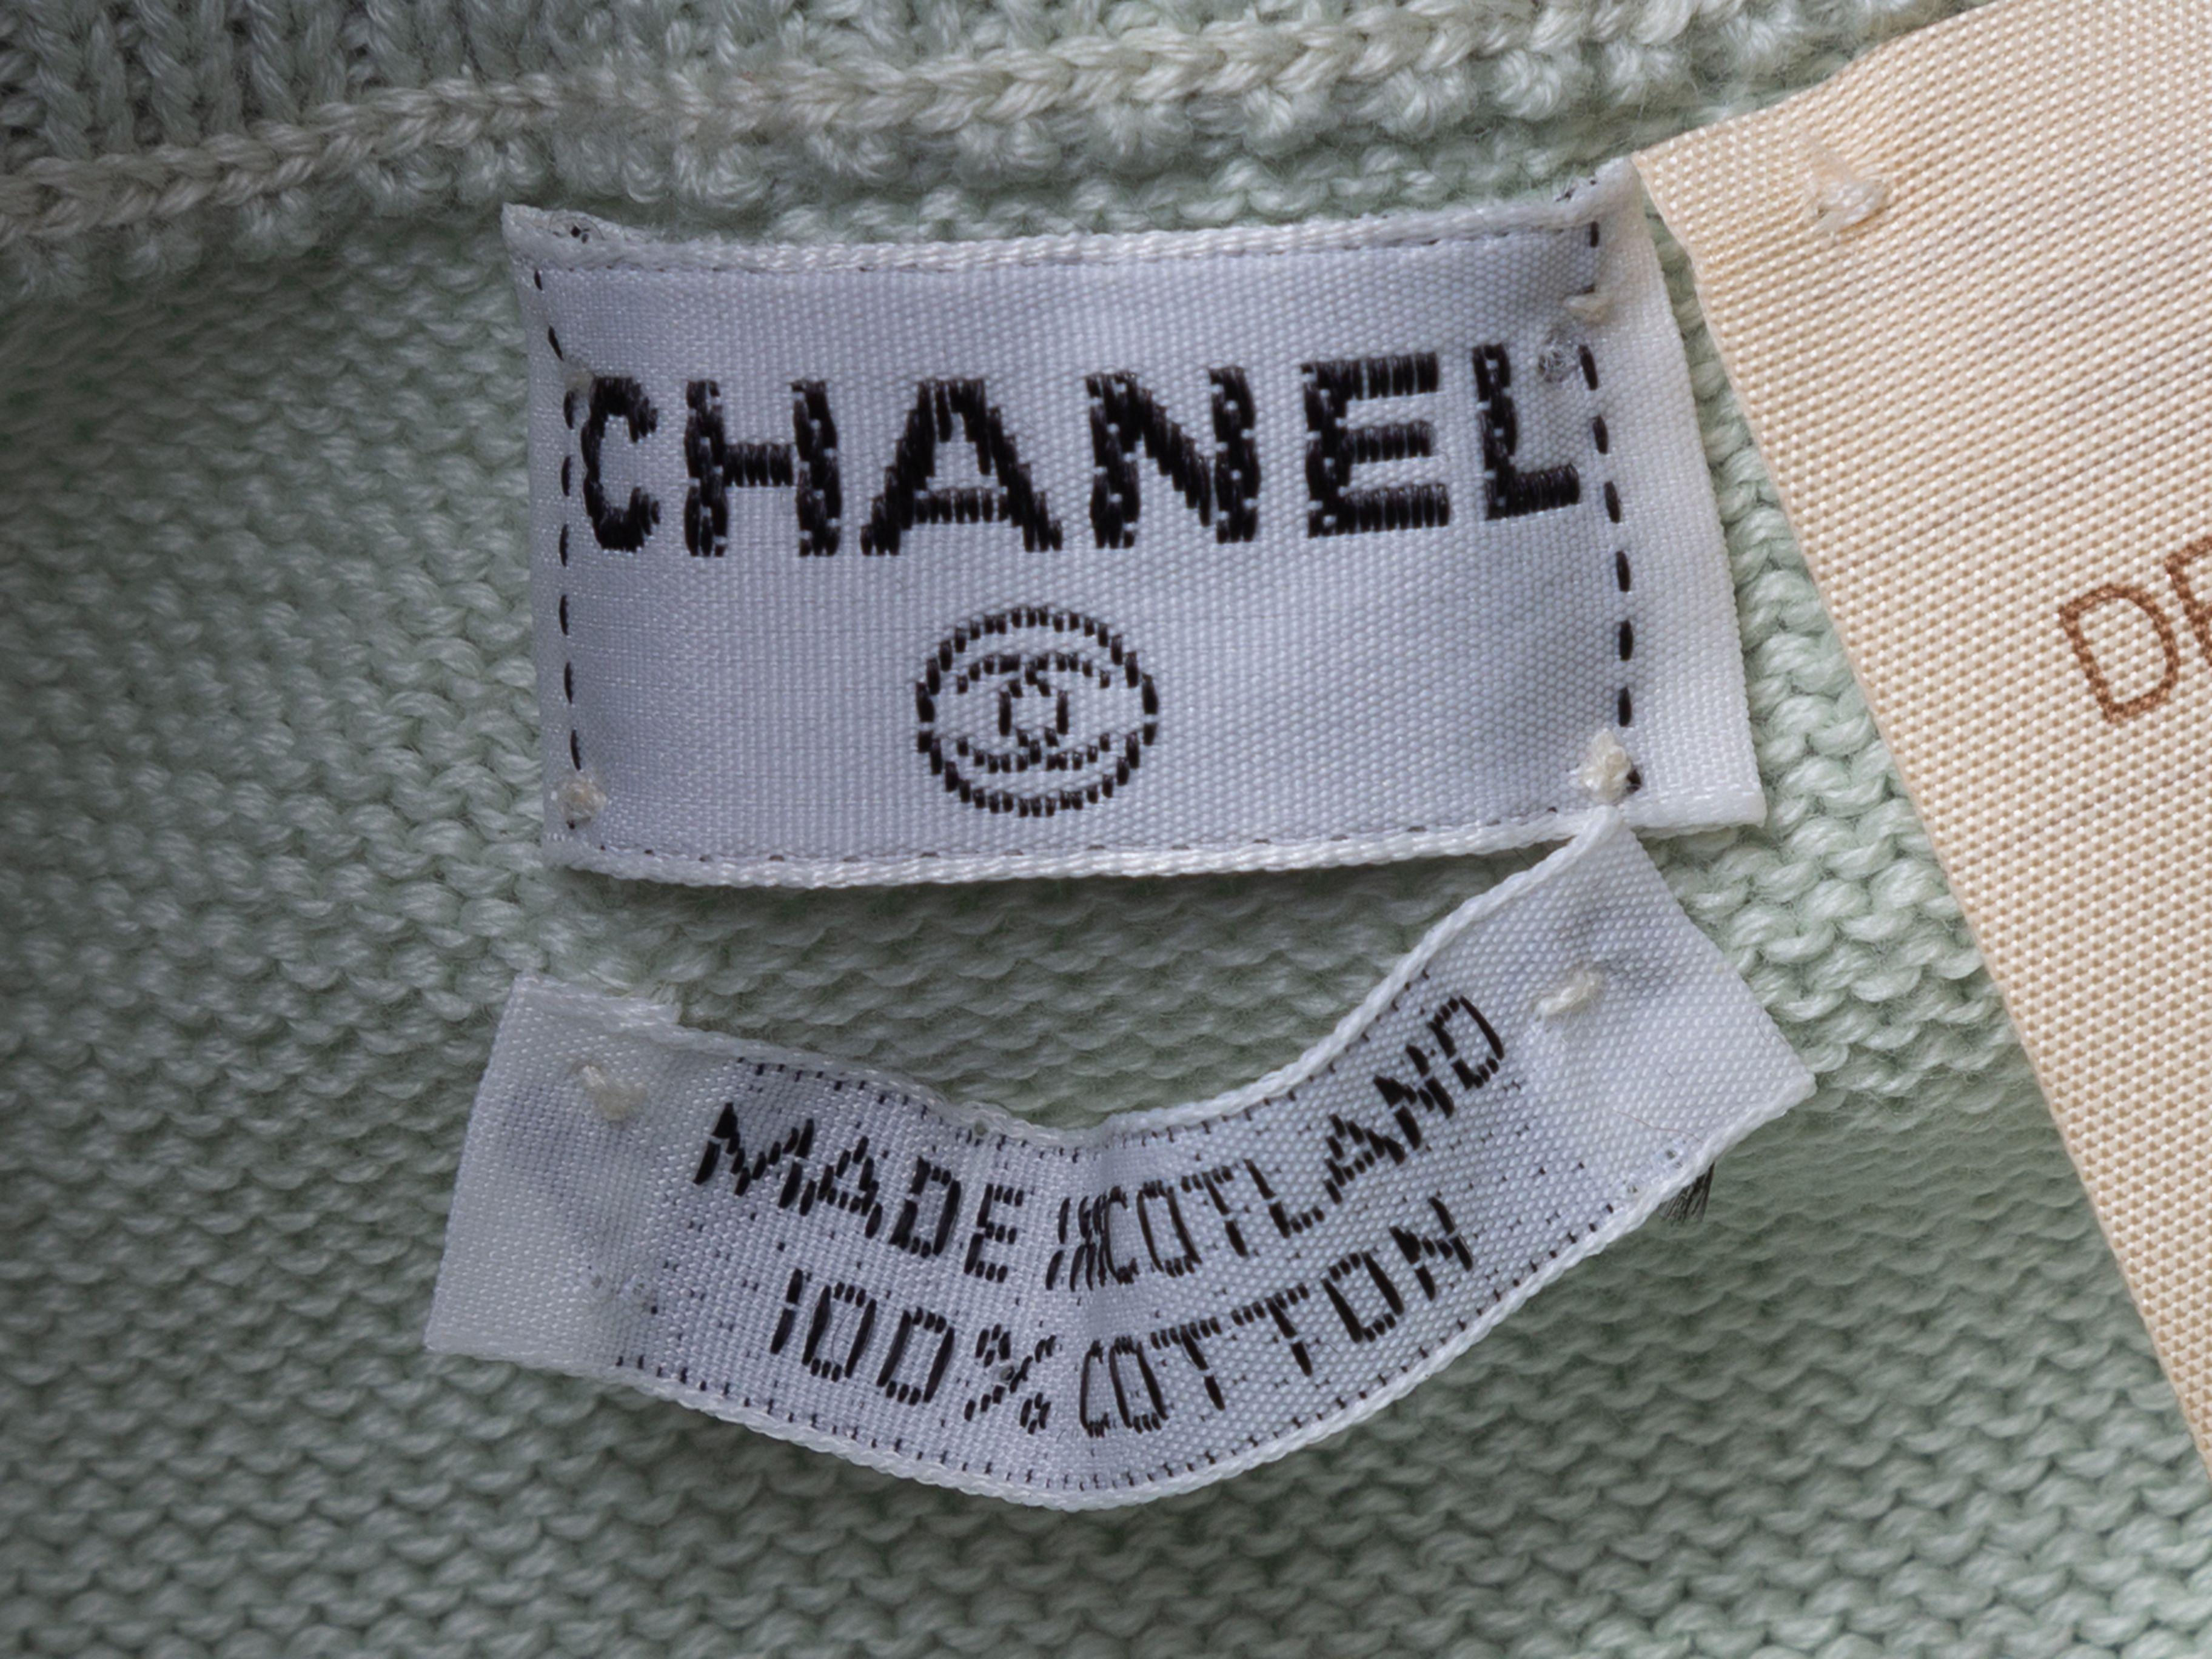 Product Details: Vintage pale blue knit skirt by Chanel. Elasticized waistband. 30